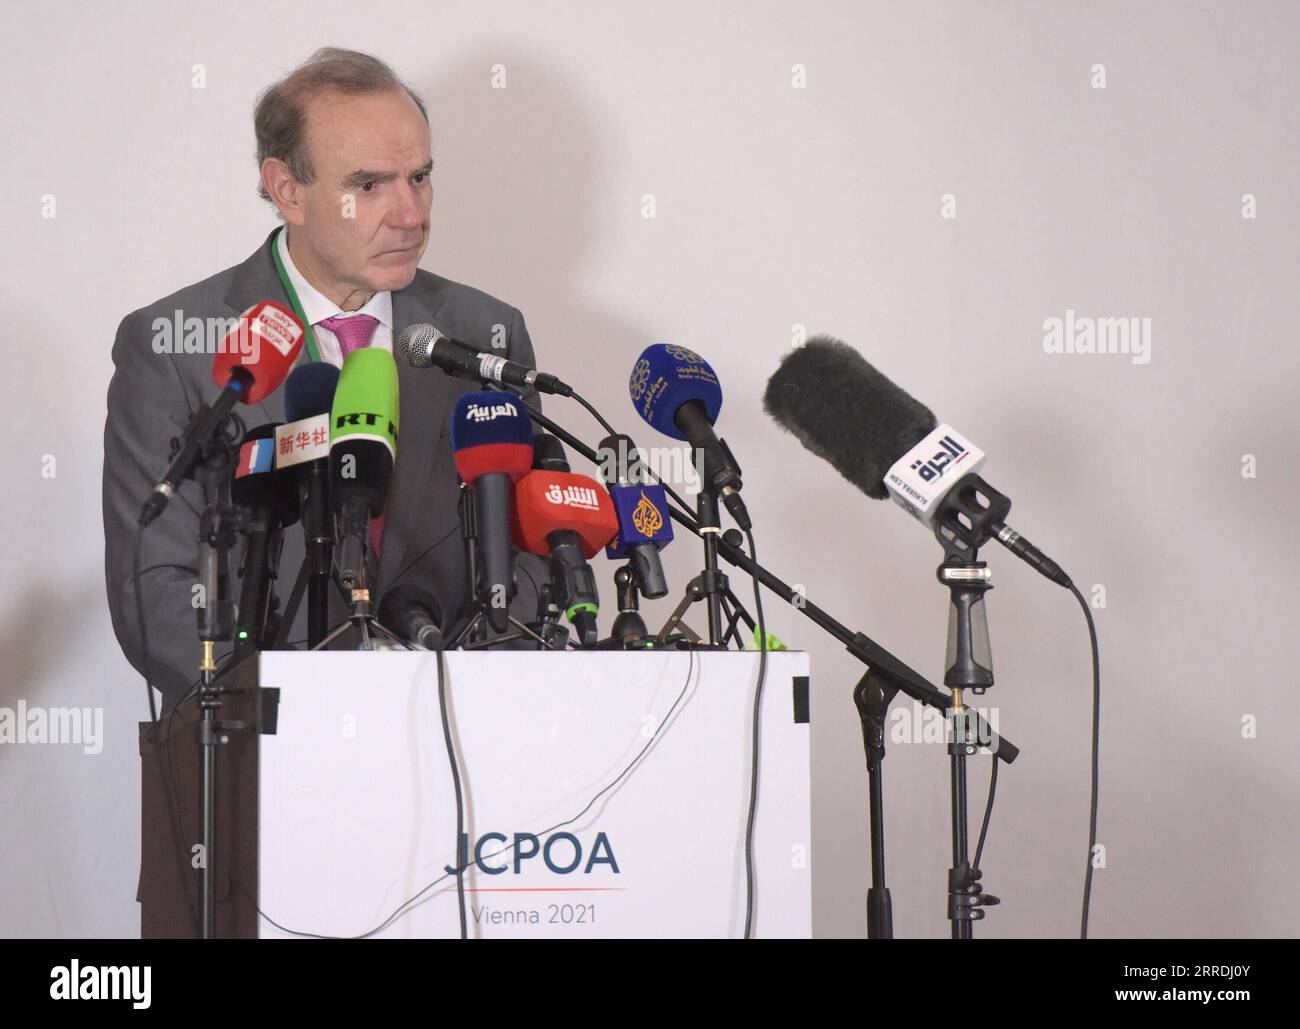 211228 -- VIENNA, Dec. 28, 2021 -- Enrique Mora, deputy secretary general of the European External Action Service, speaks to reporters after a meeting of the Joint Comprehensive Plan of Action JCPOA Joint Commission in Vienna, Austria, on Dec. 27, 2021.  AUSTRIA-VIENNA-JCPOA-JOINT COMMISSION-MEETING GuoxChen PUBLICATIONxNOTxINxCHN Stock Photo